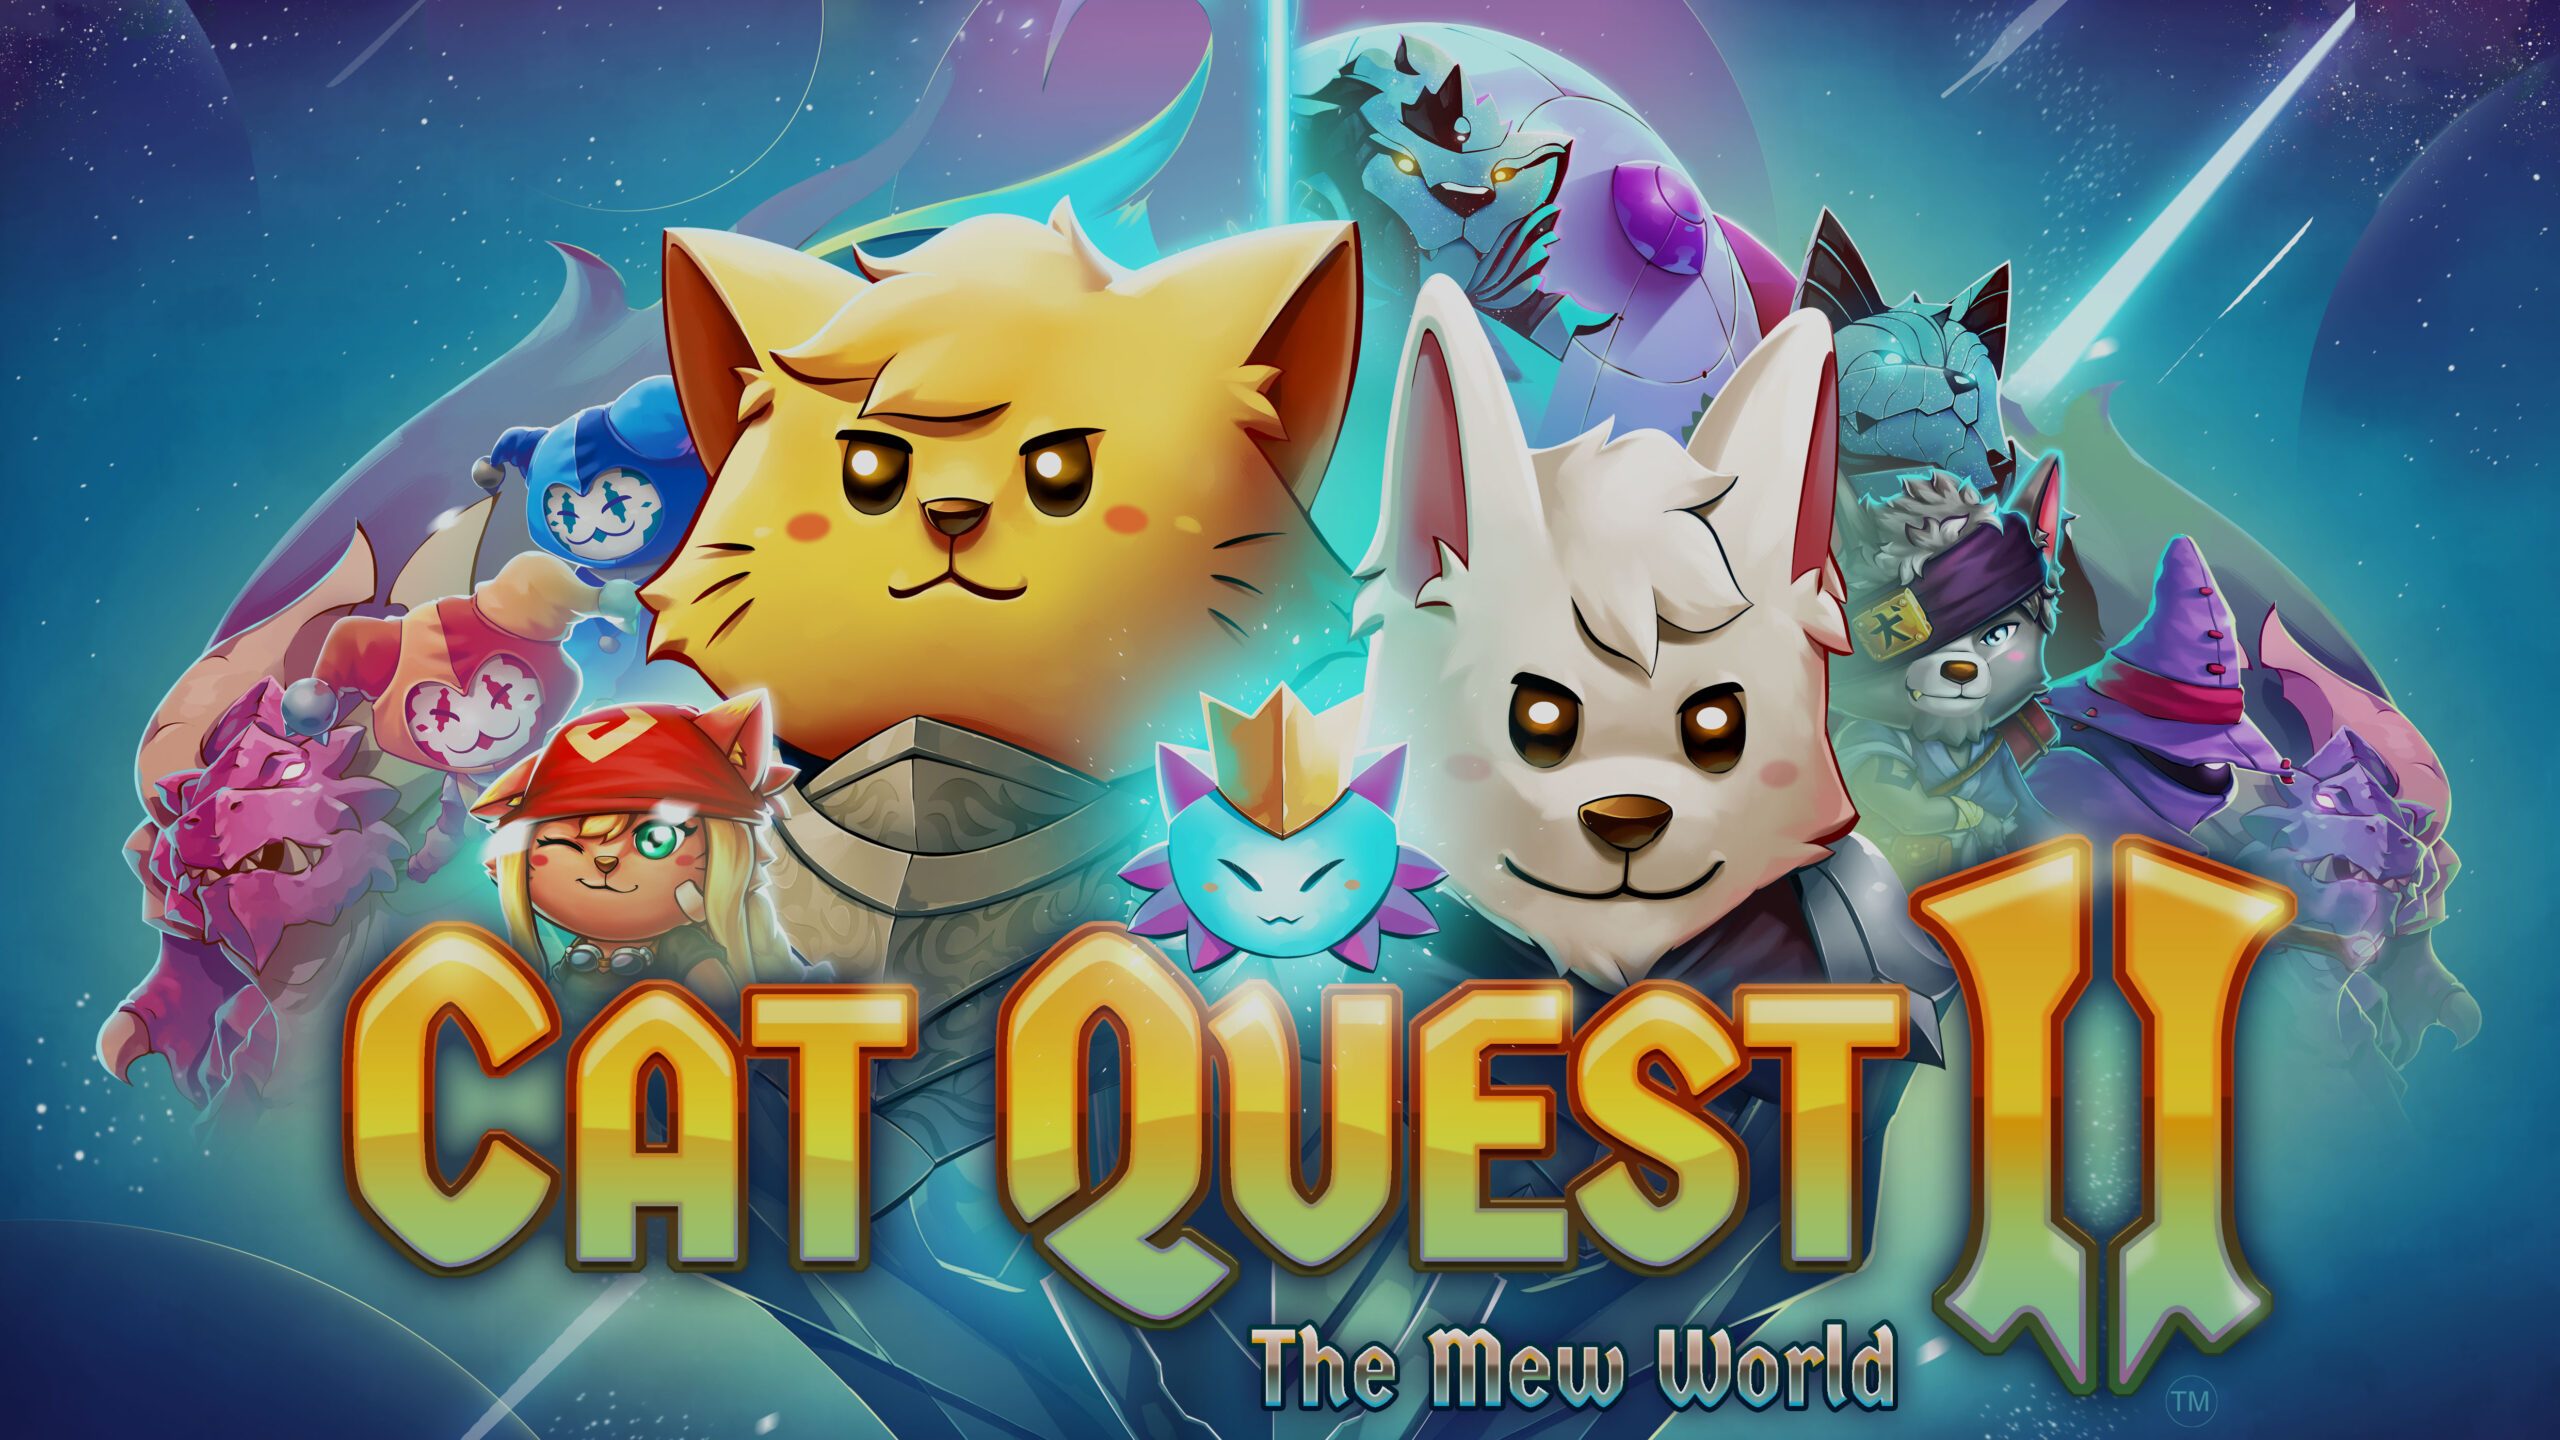 Cat Quest II embraces the Mew World with a new free update